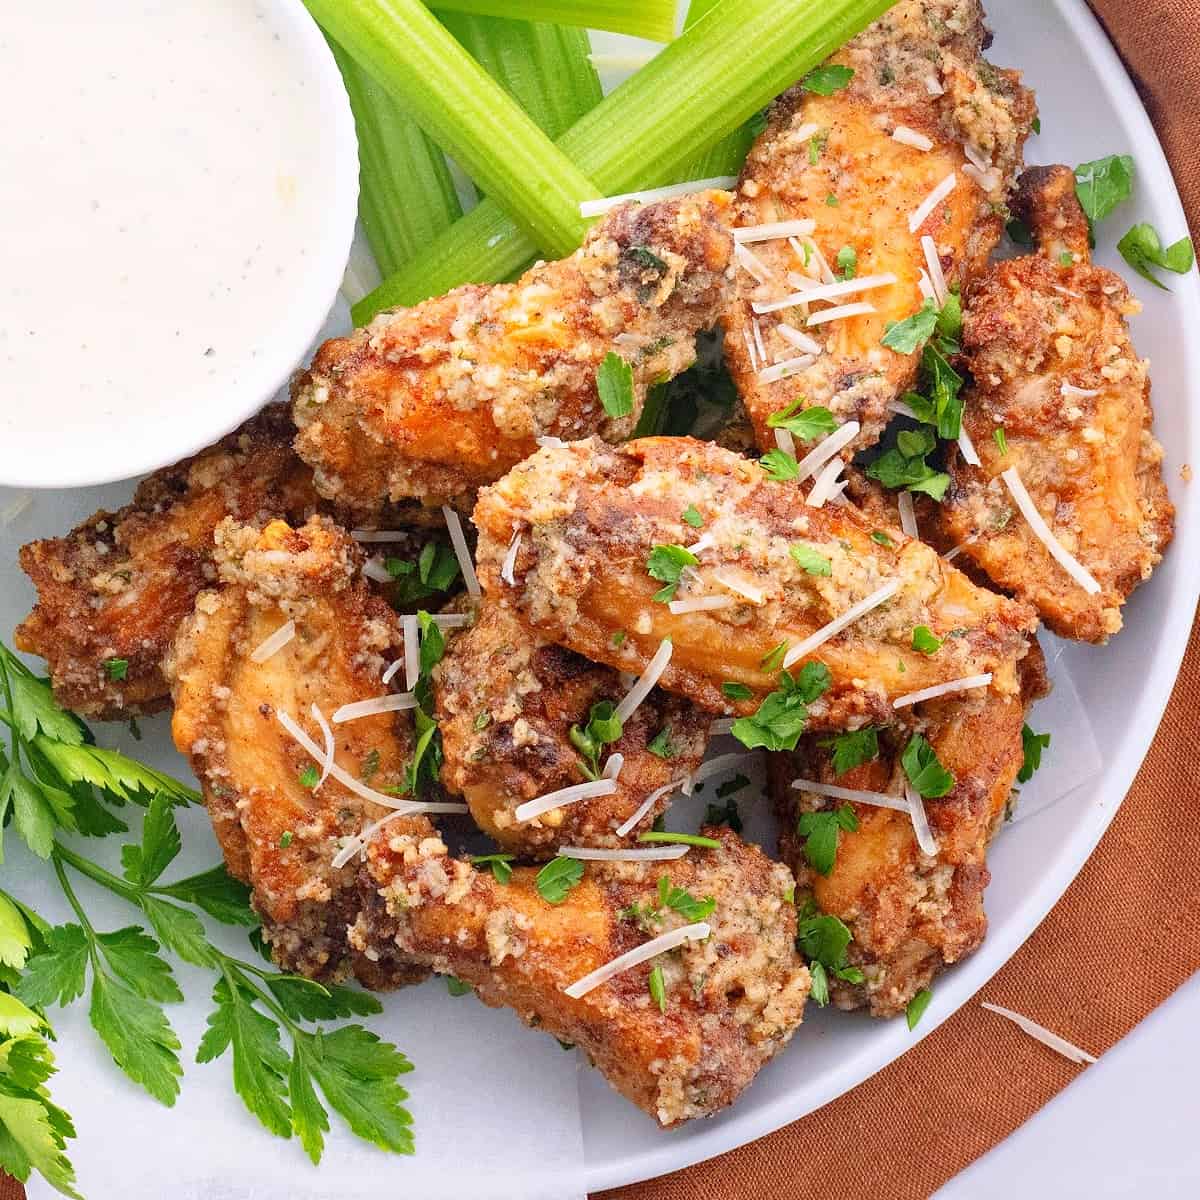 Close up of wings on a plate, garnished with parsley, next to a bowl of ranch and some celery sticks